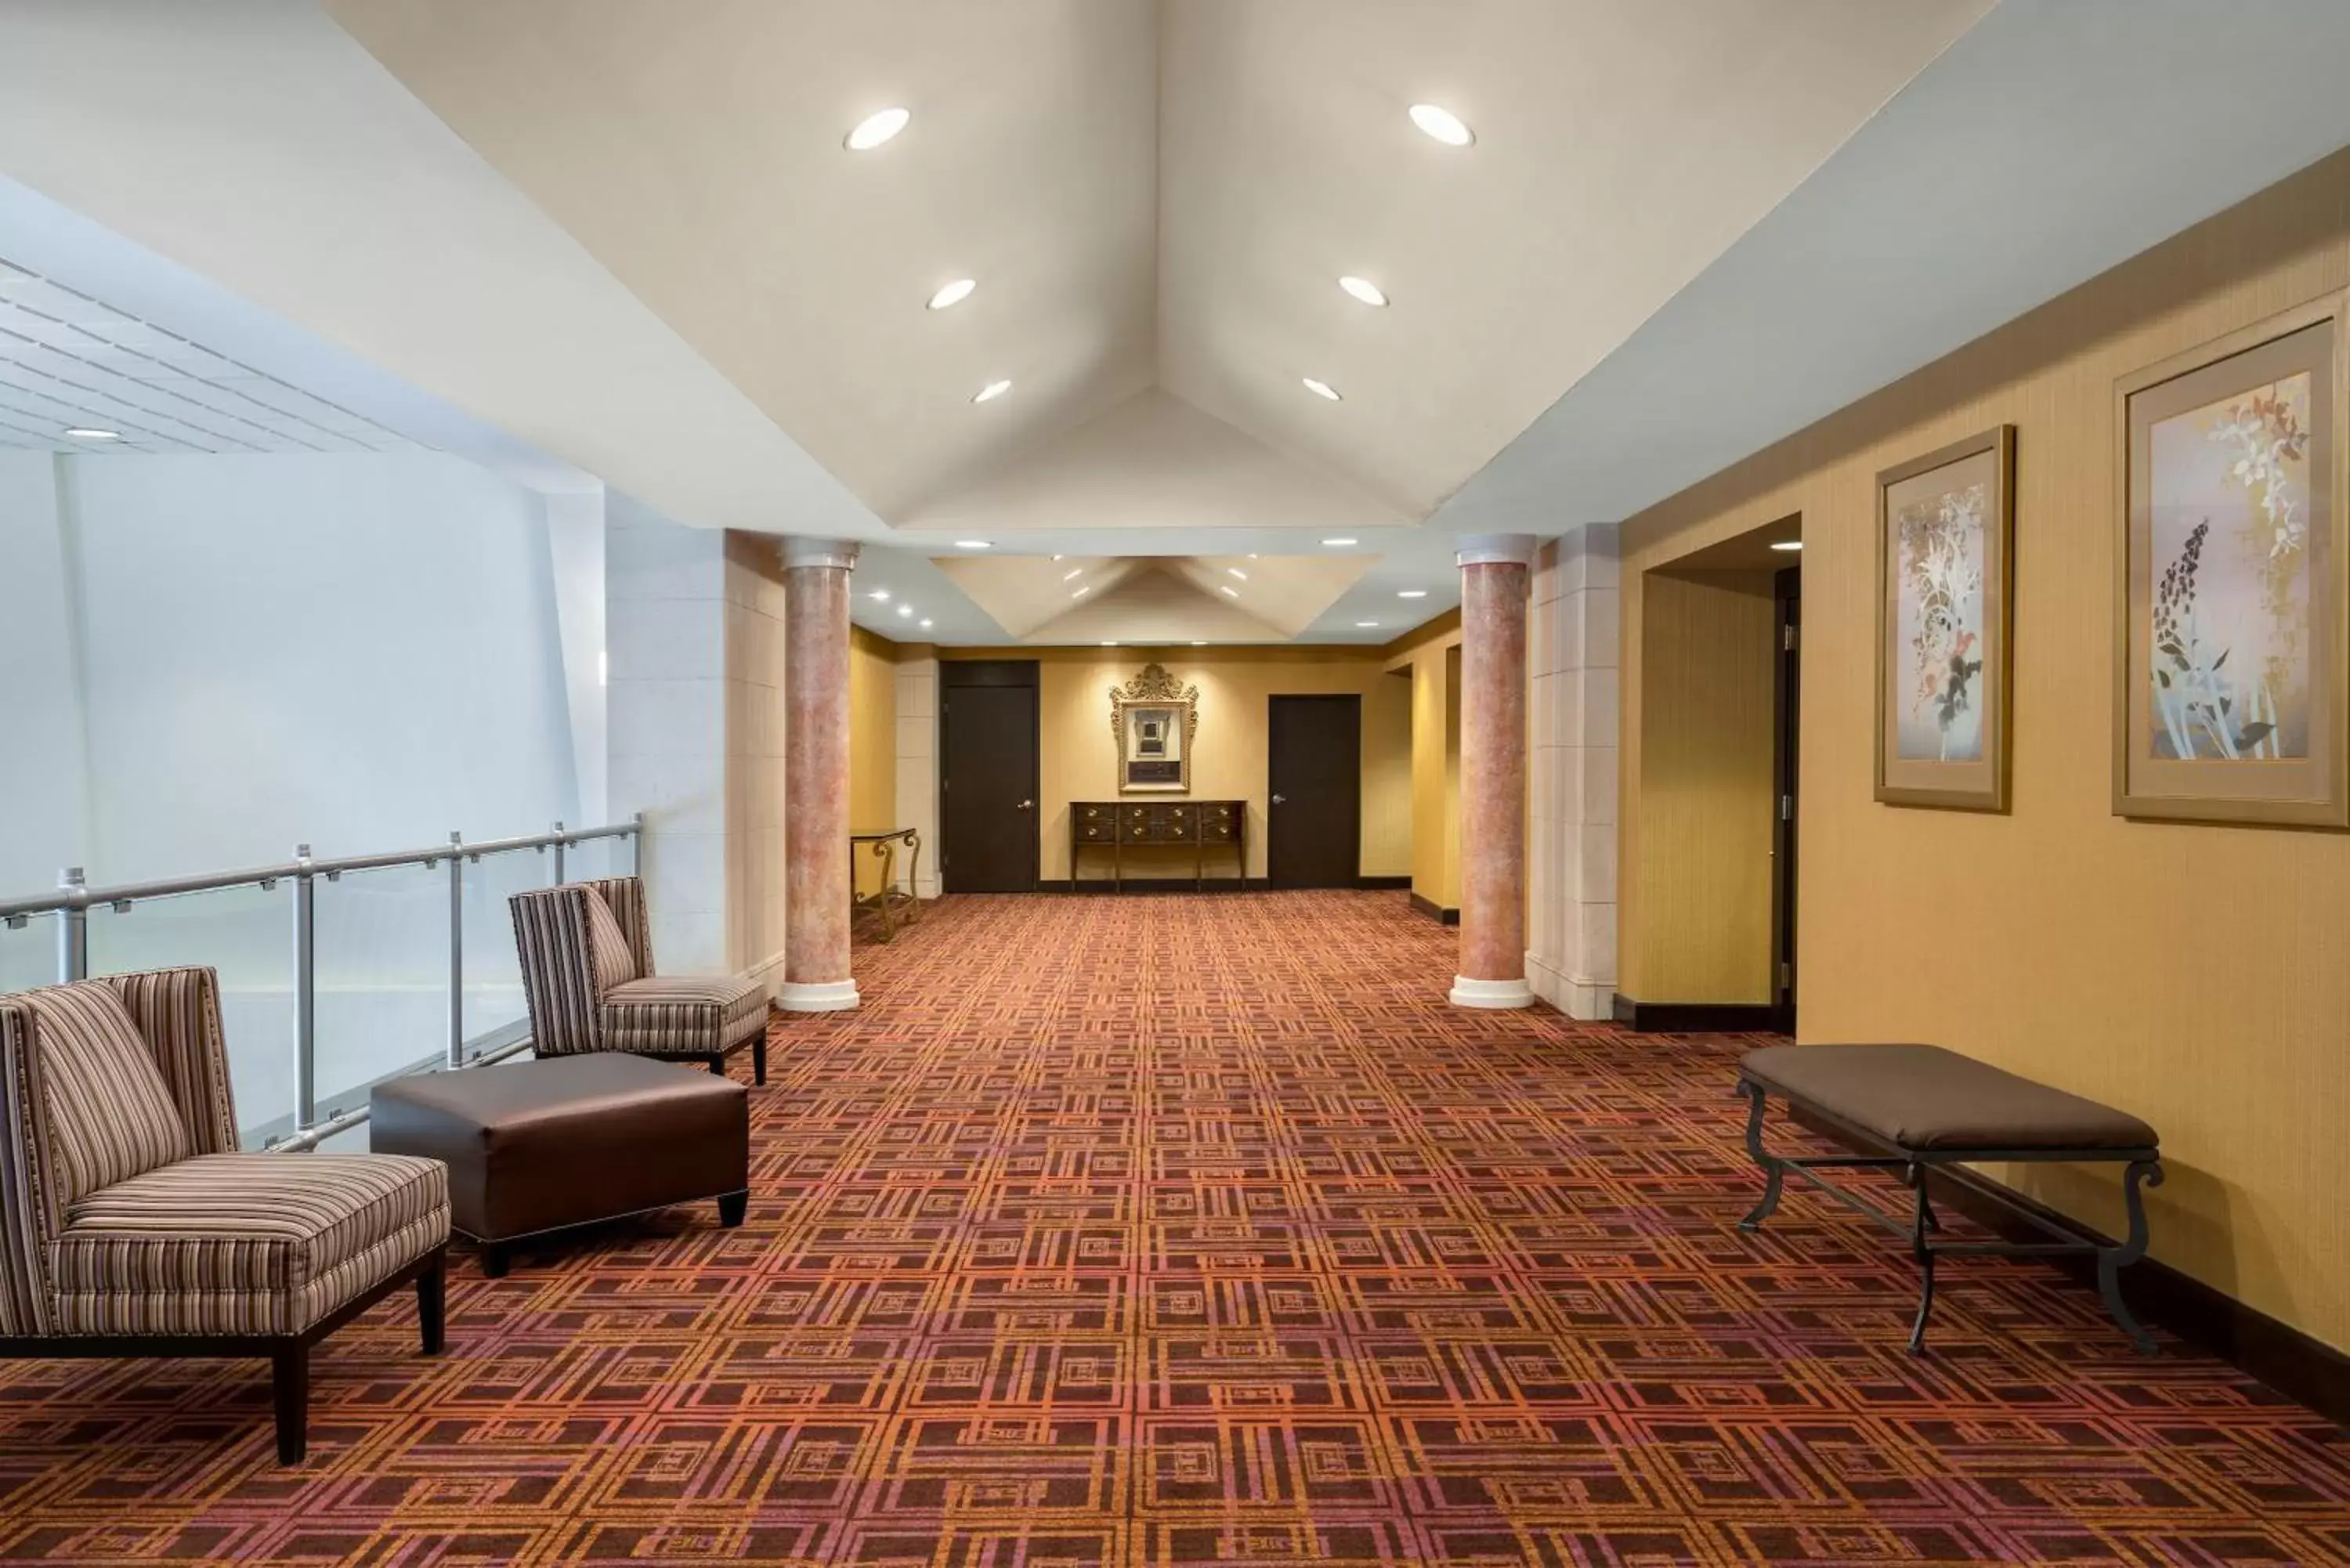 Meeting/conference room, Banquet Facilities in Crowne Plaza Englewood, an IHG Hotel